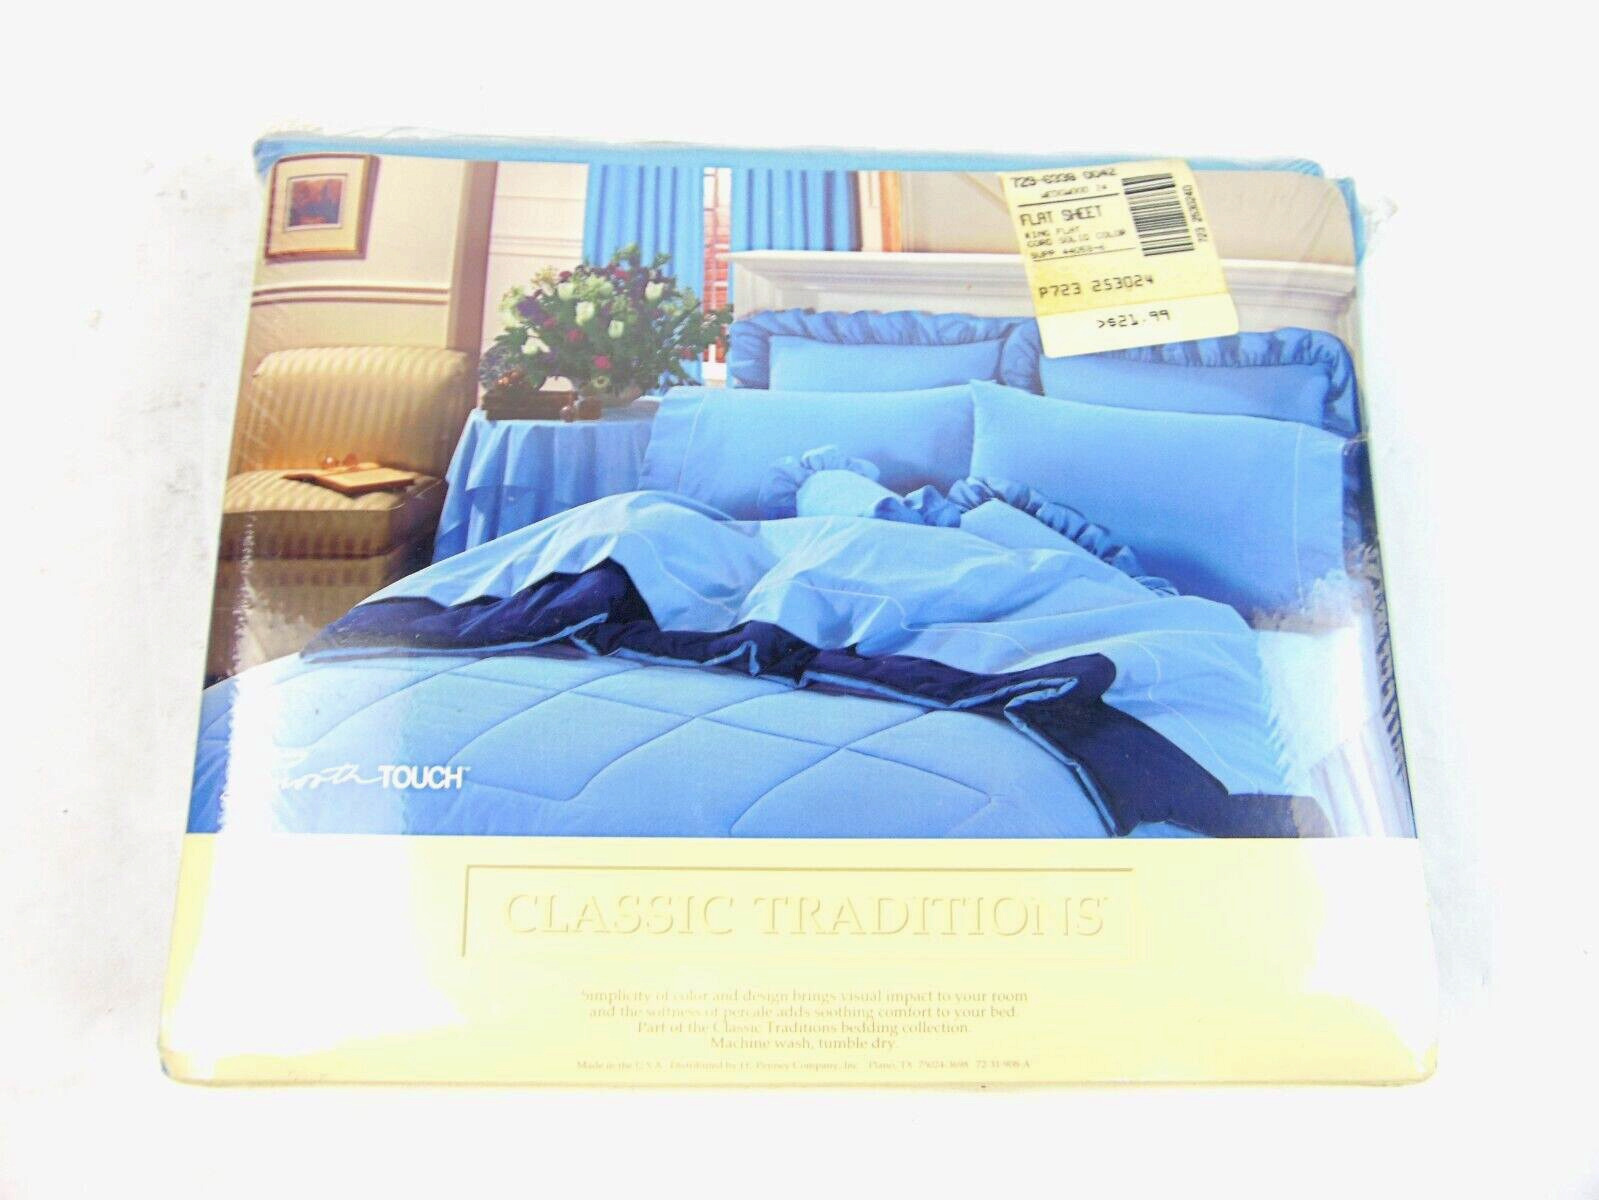 Vintage JC Penney Classic Traditions King Blue Flat Sheet